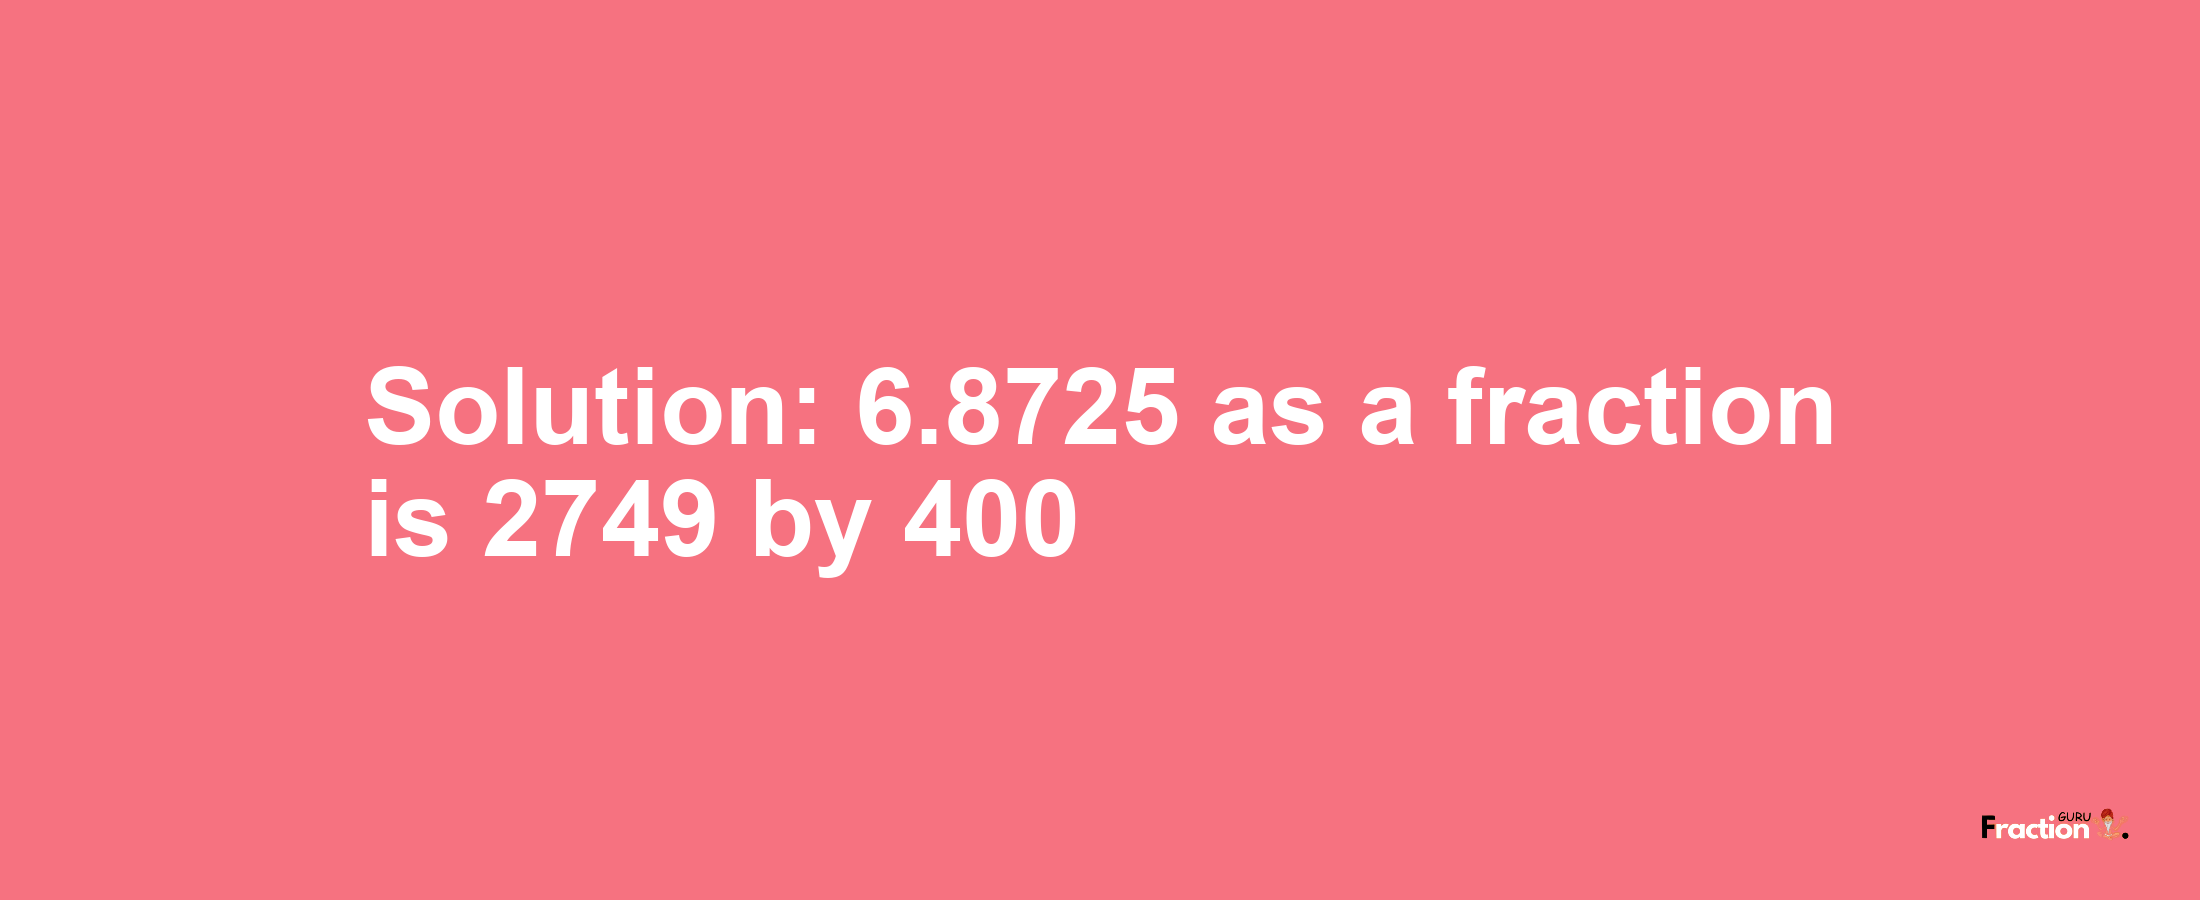 Solution:6.8725 as a fraction is 2749/400